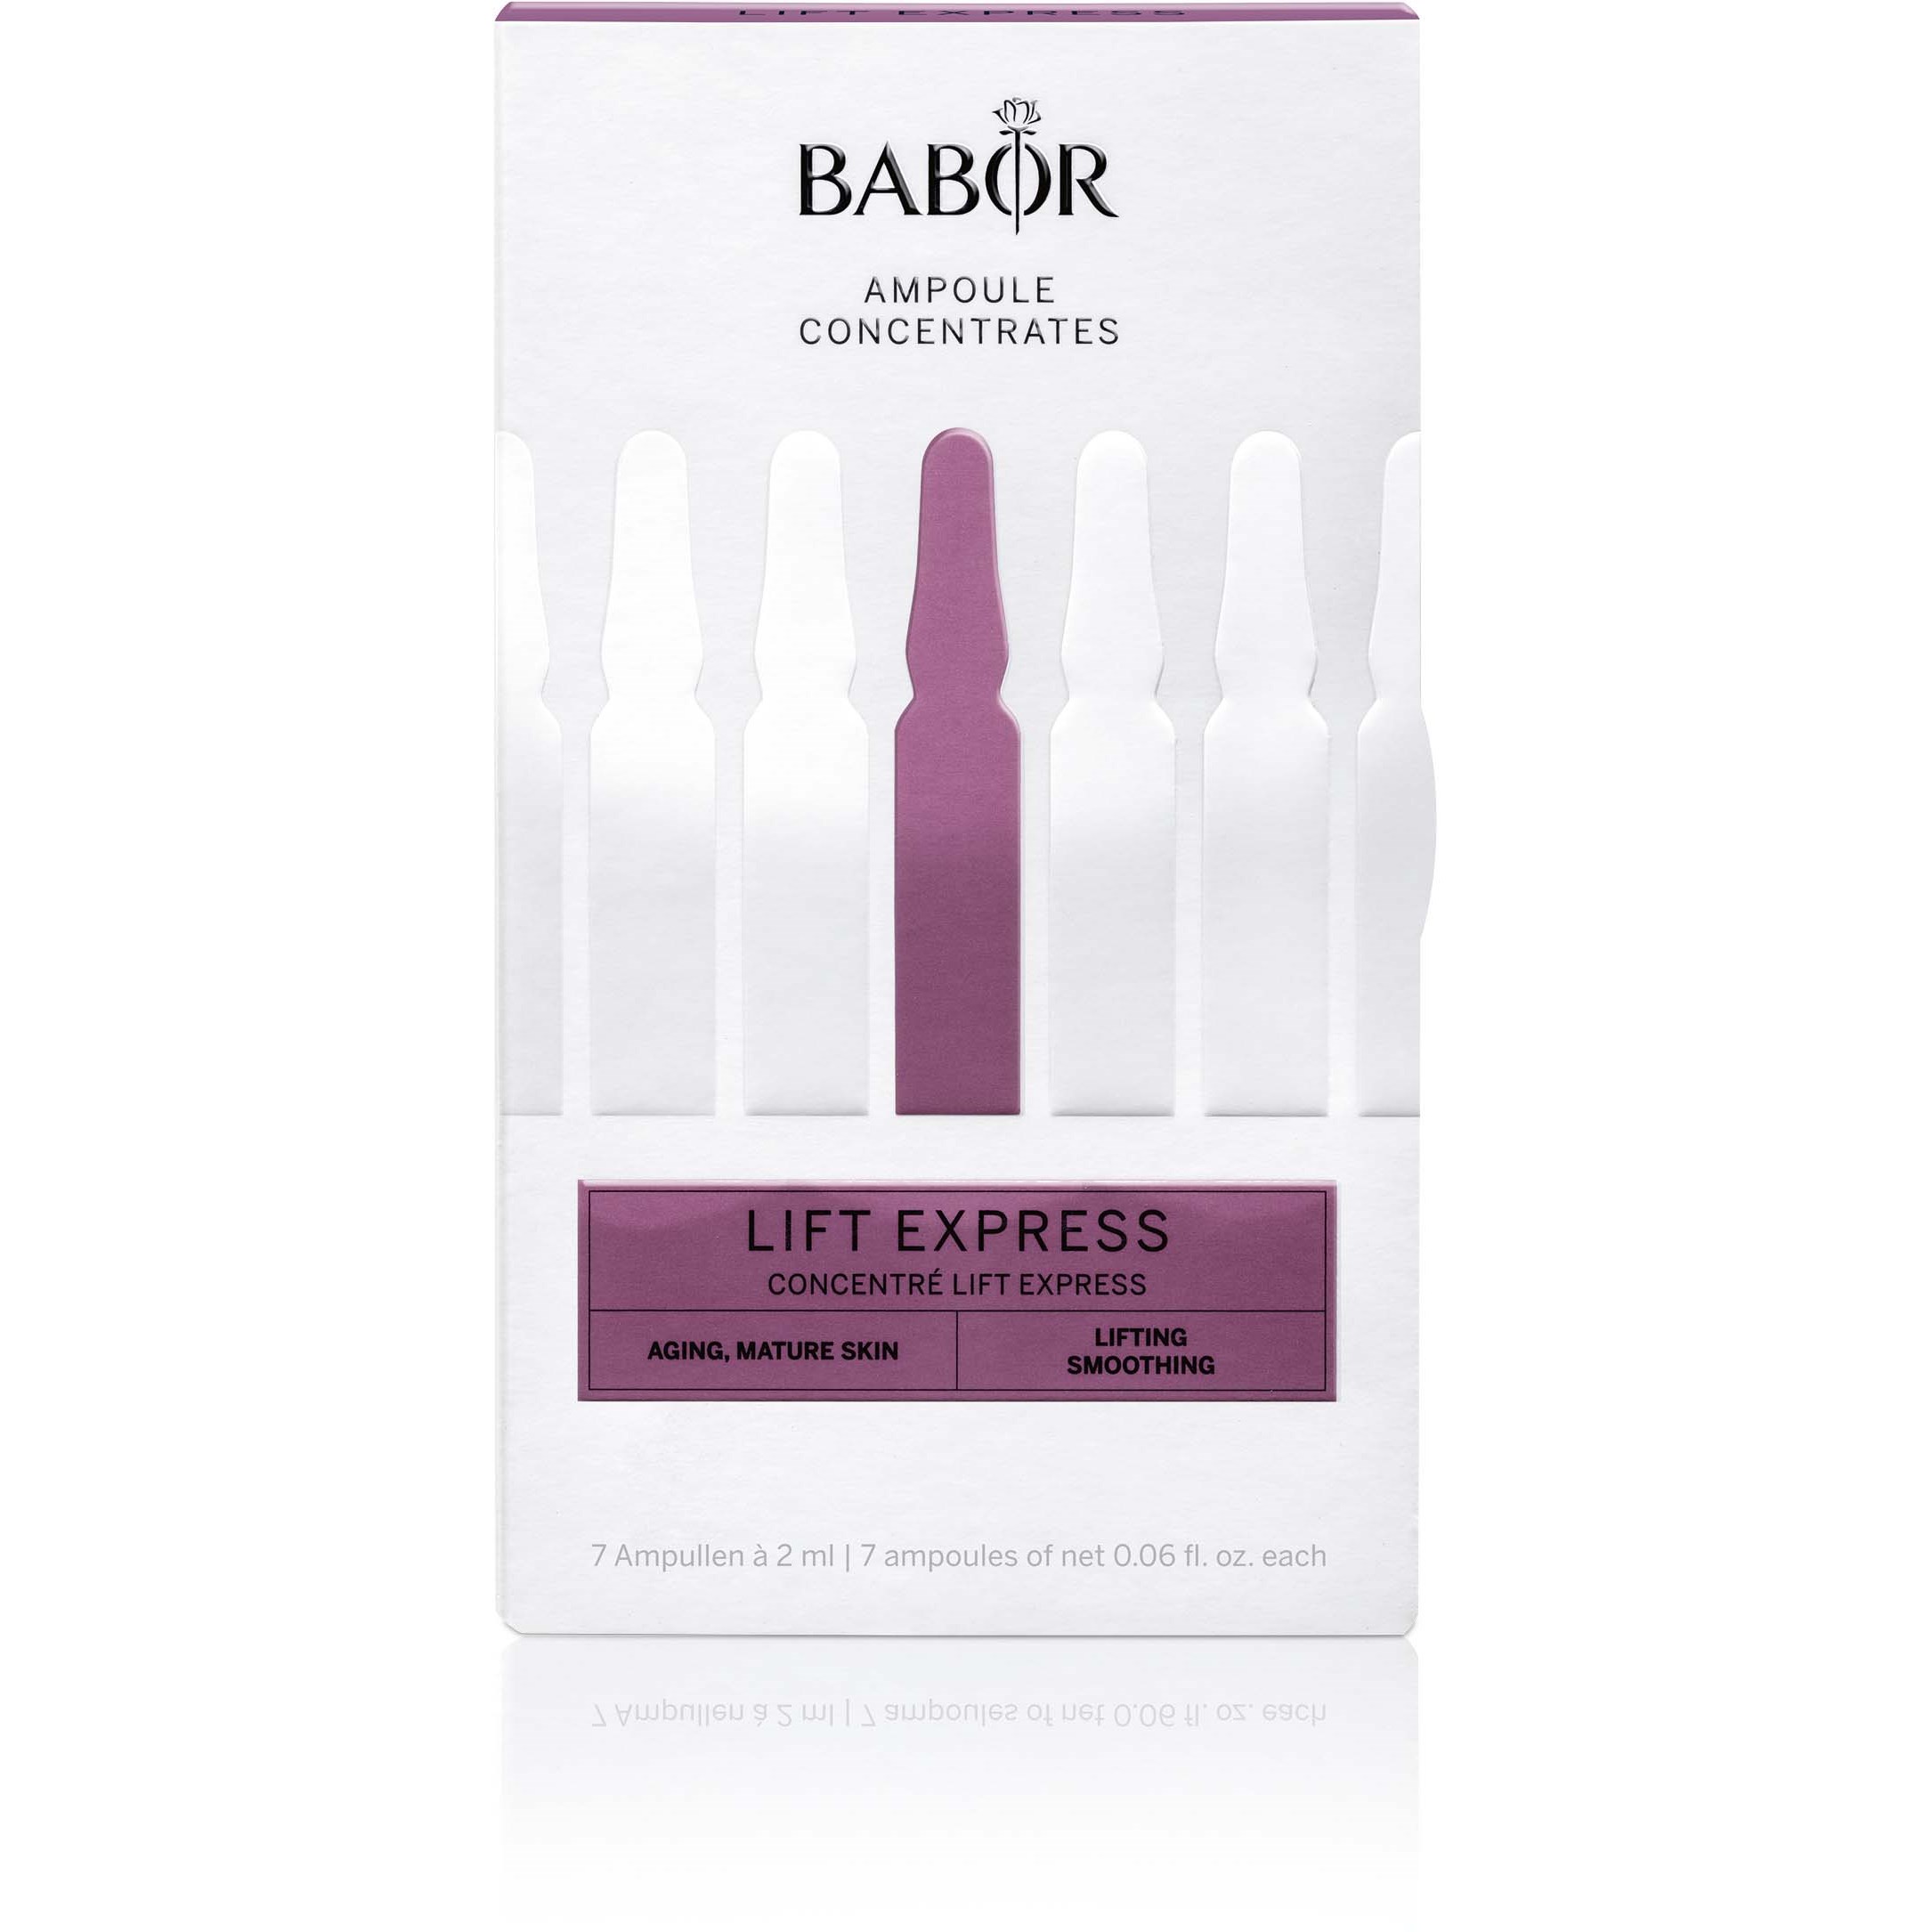 Läs mer om BABOR Ampoule Concentrates Lift Express 14 ml